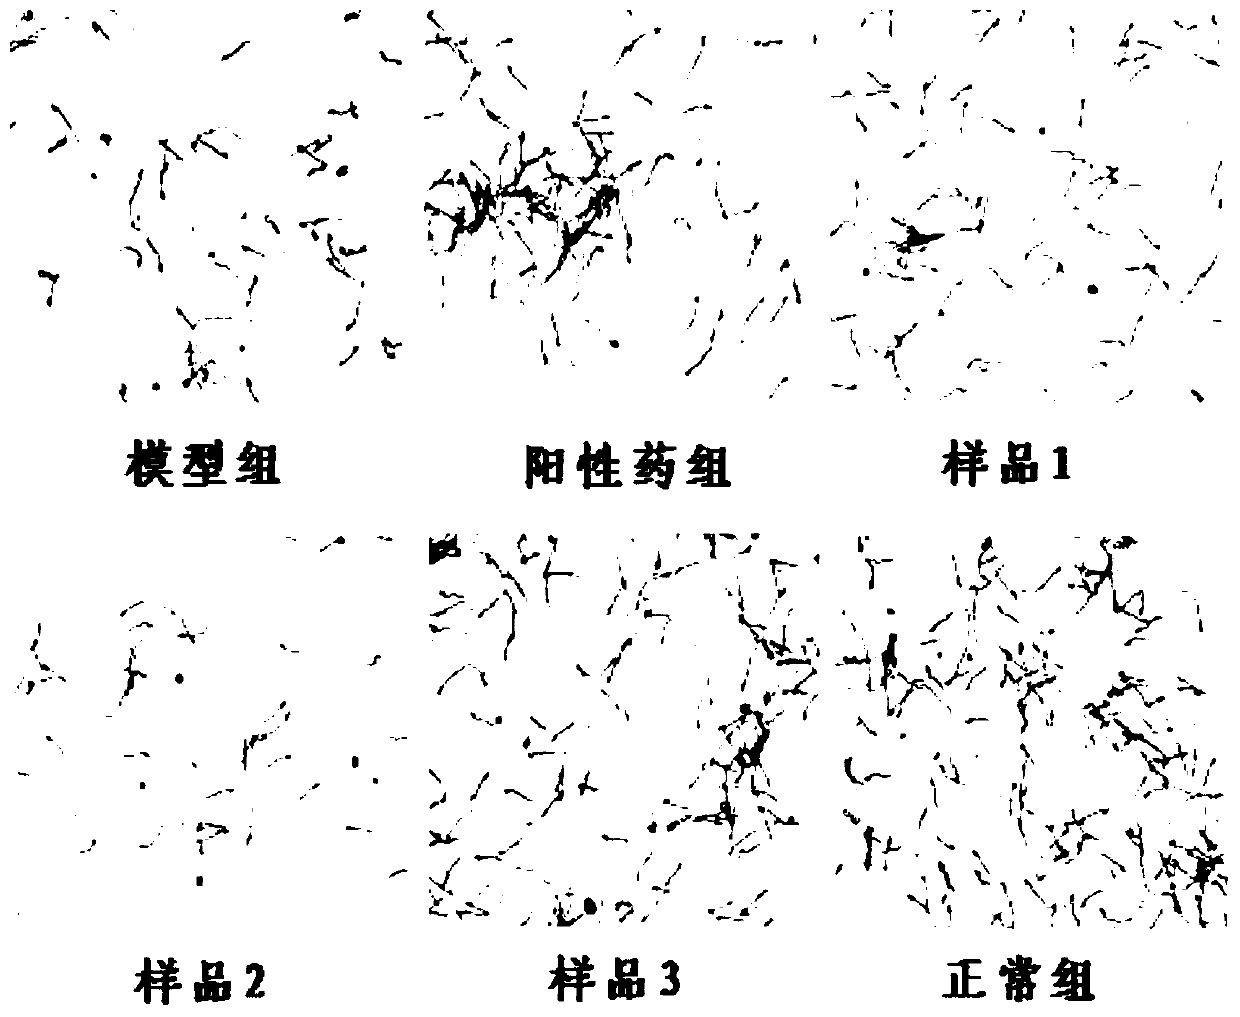 Ginseng glycoprotein as well as preparation method and application thereof